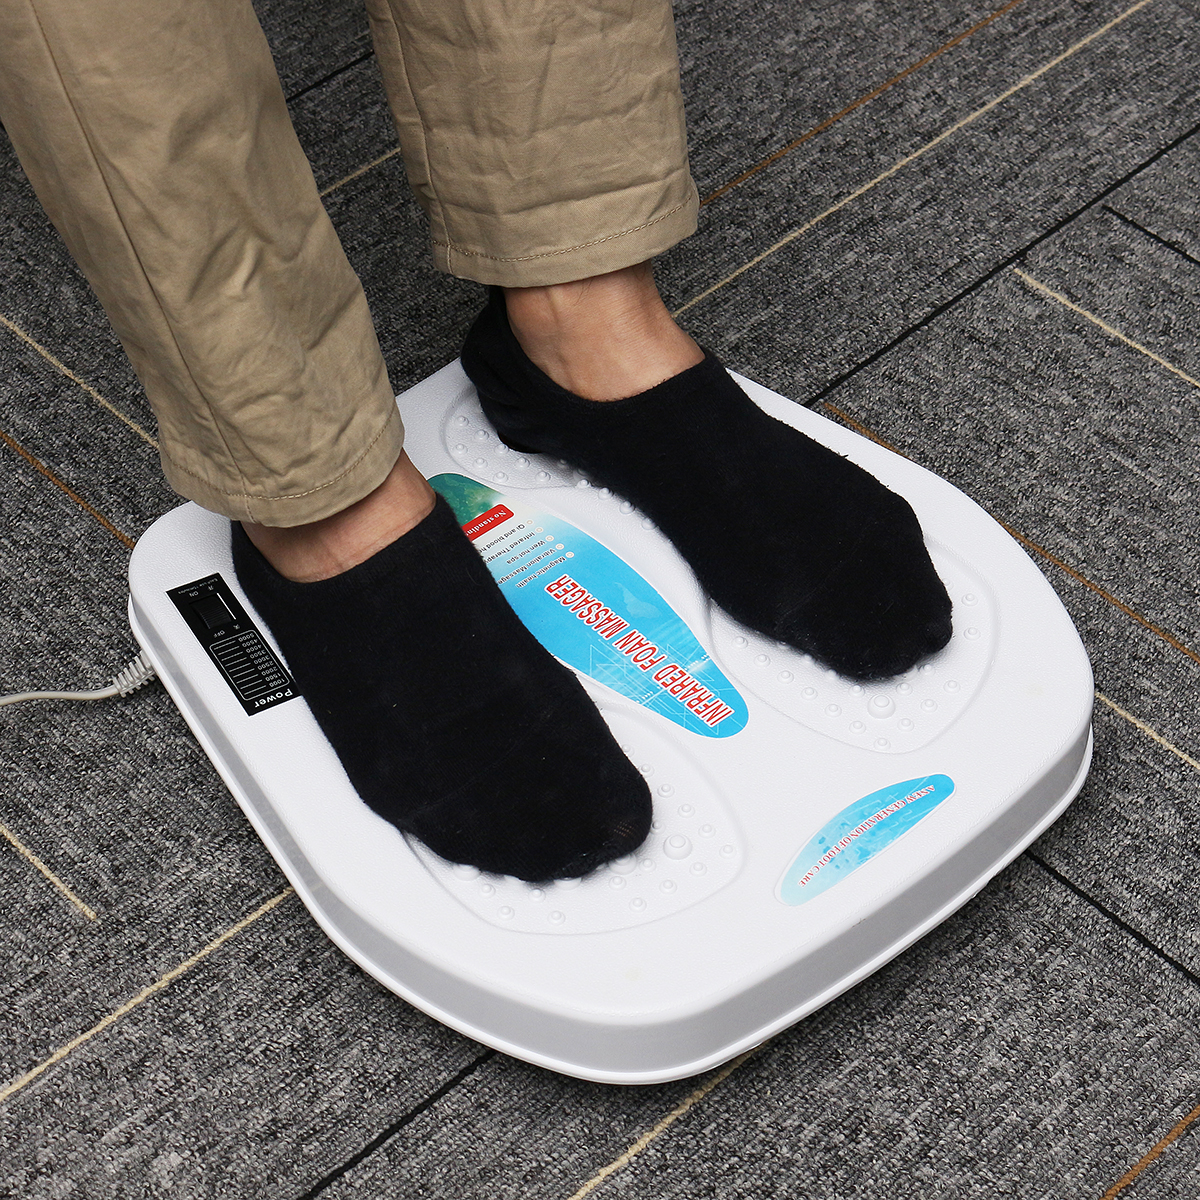 

Far Infrared Foot Massager Vibration Magnetic Heating